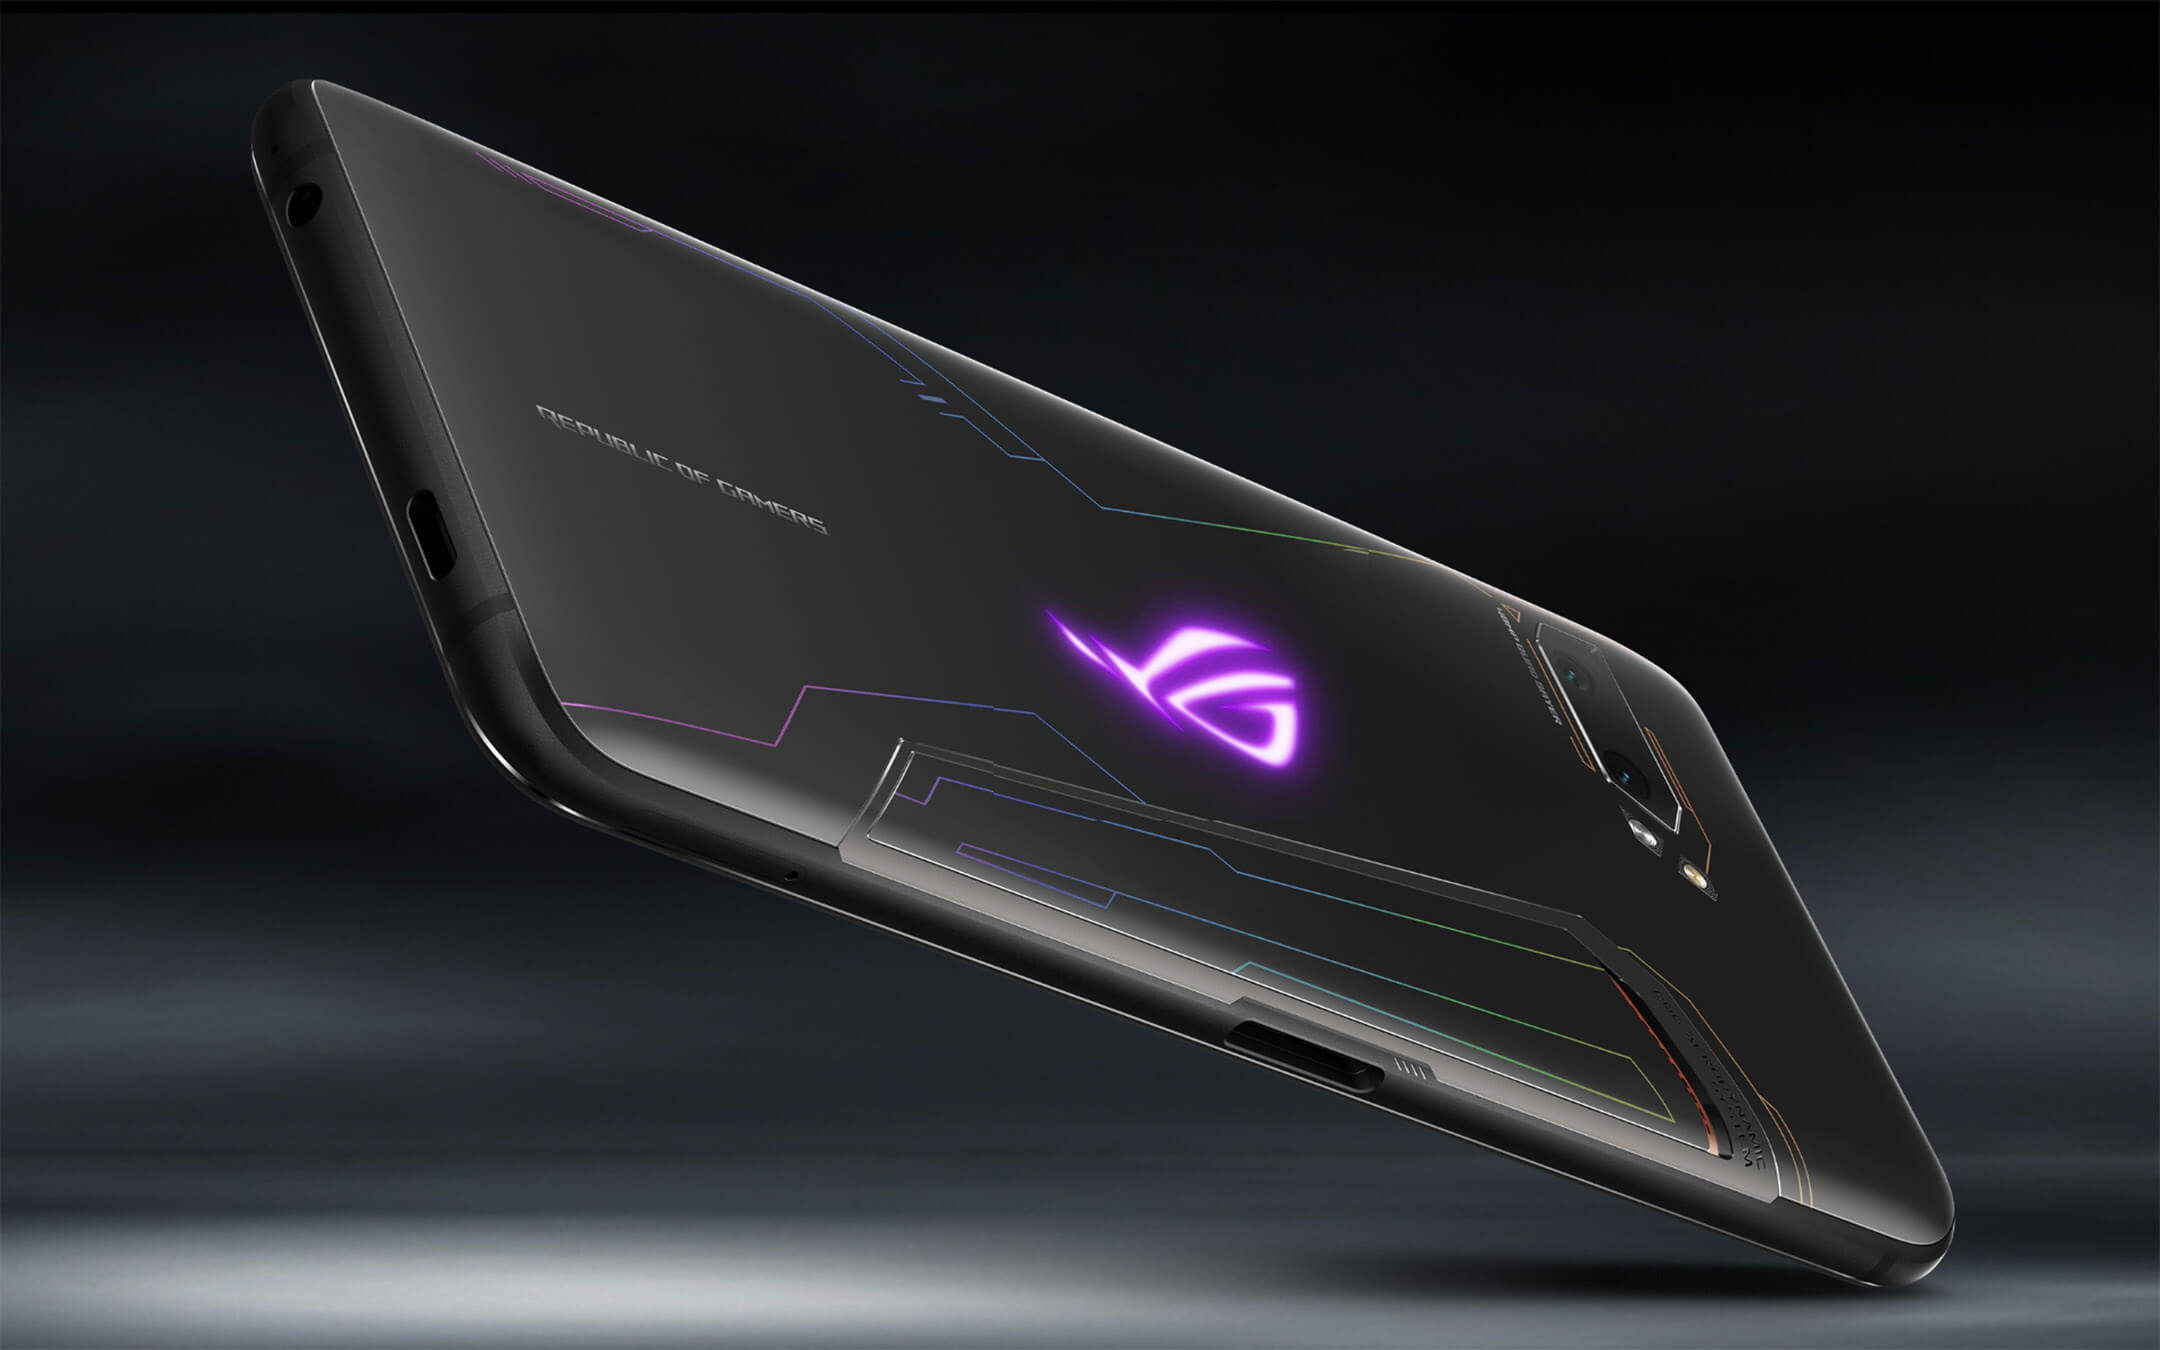 ASUS ROG Phone 2 Ultimate Edition